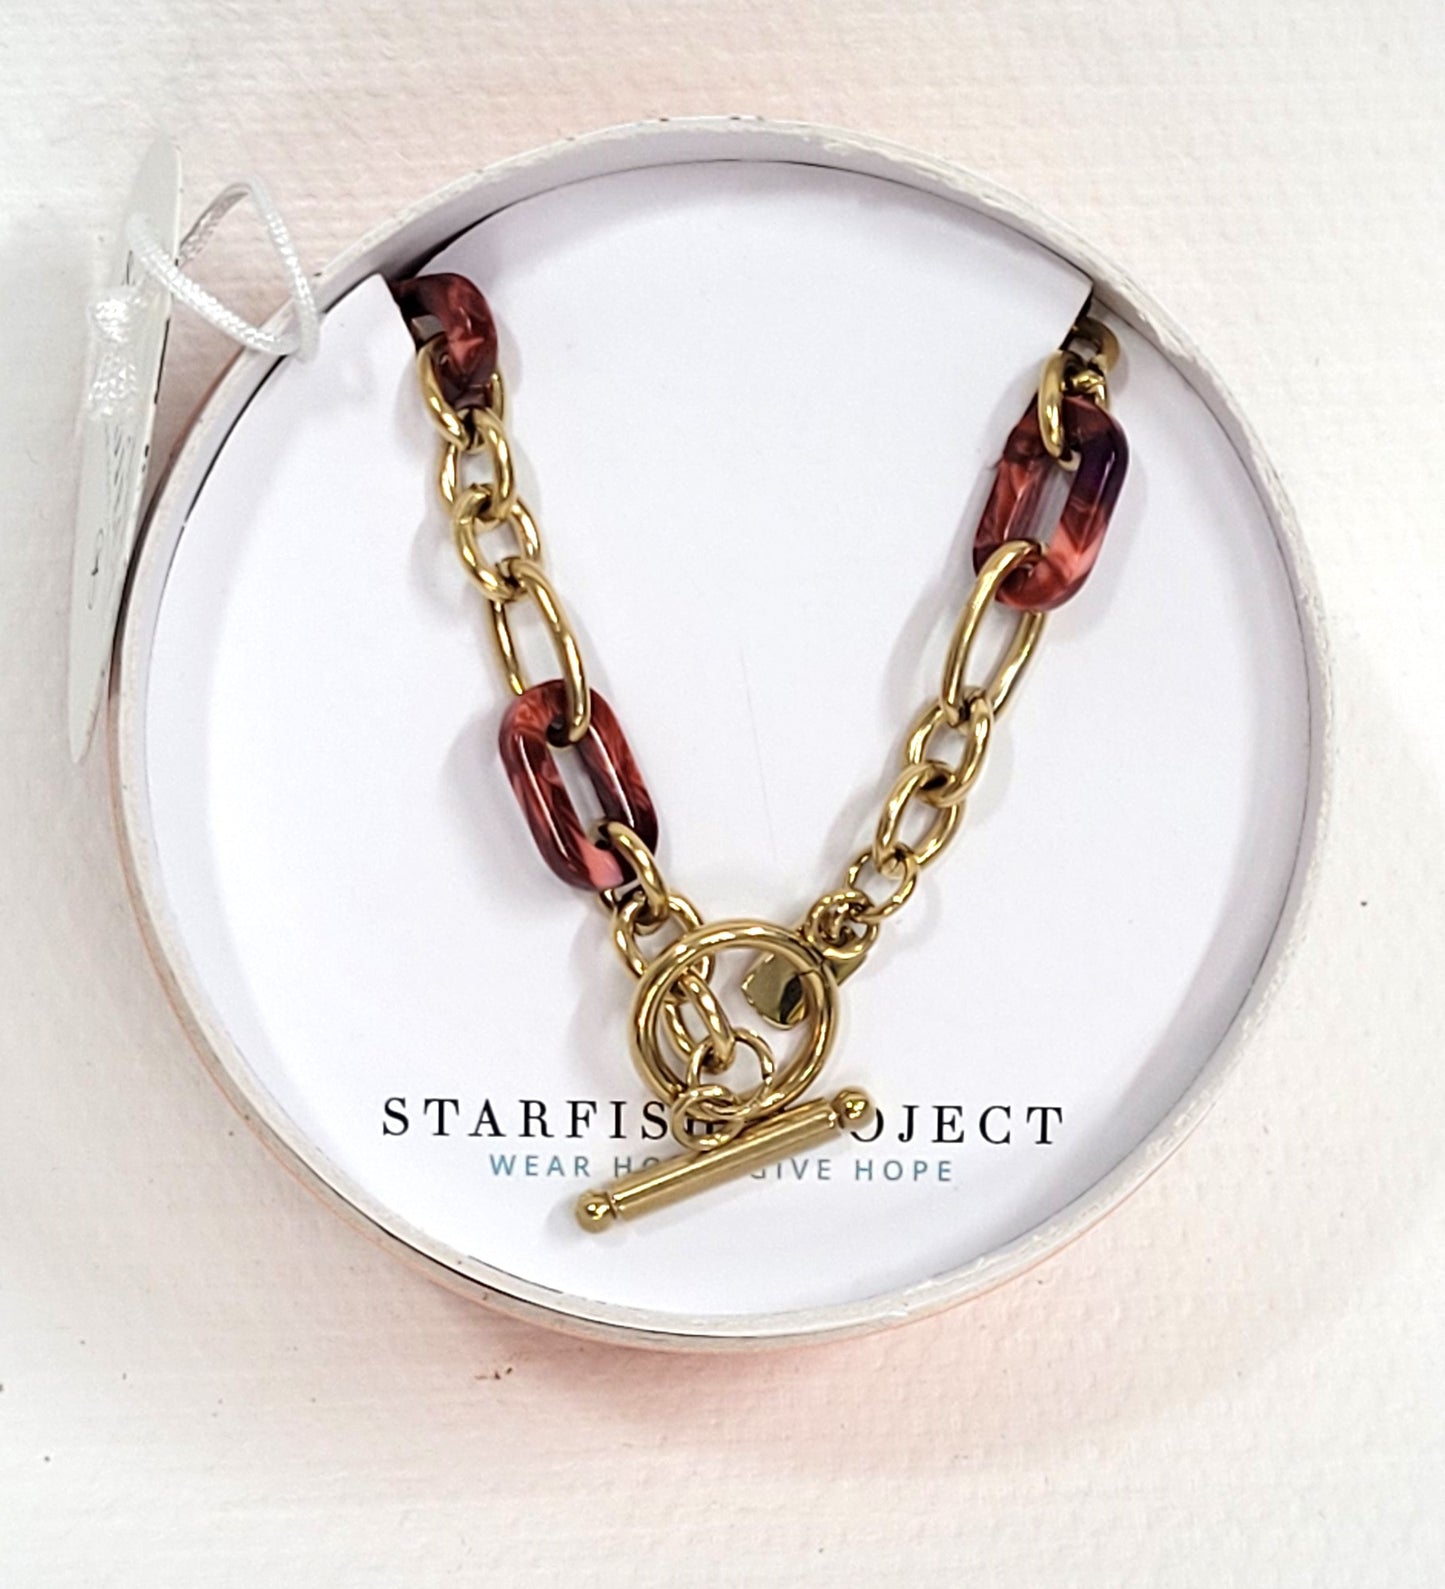 Blush Kindred Hope Bracelet by Starfish Project